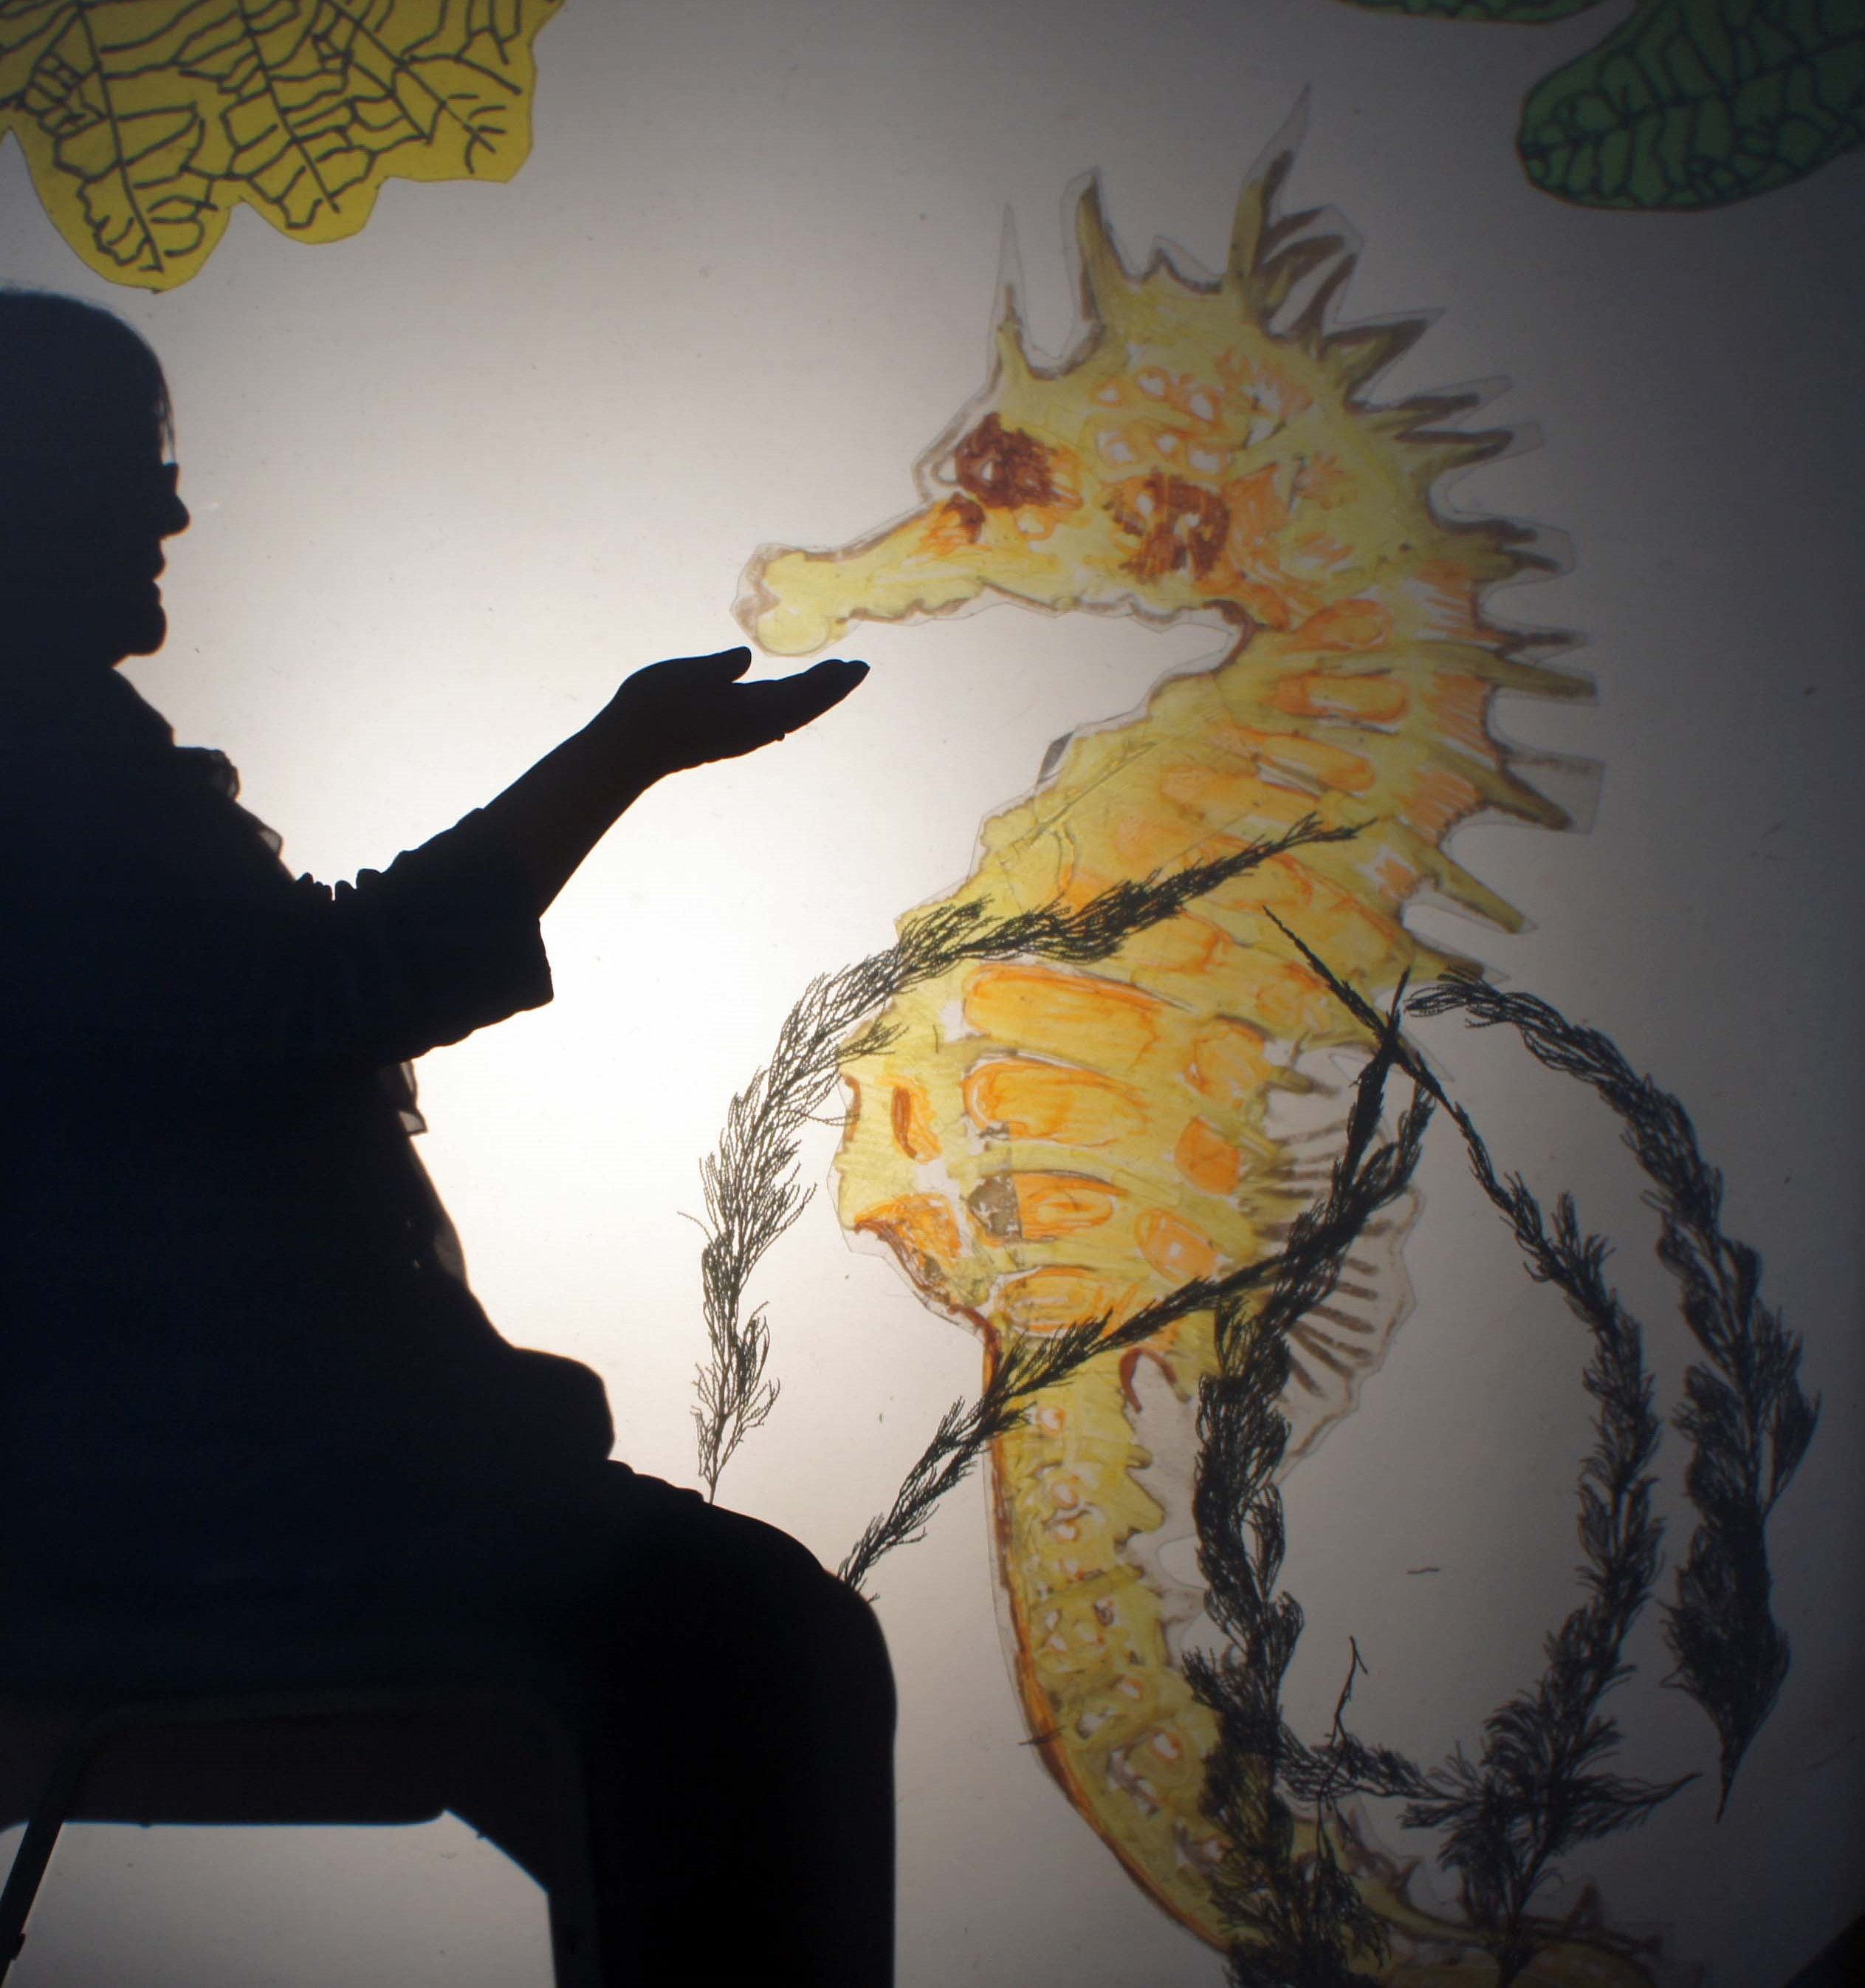 Shadow Theatre with the elderly